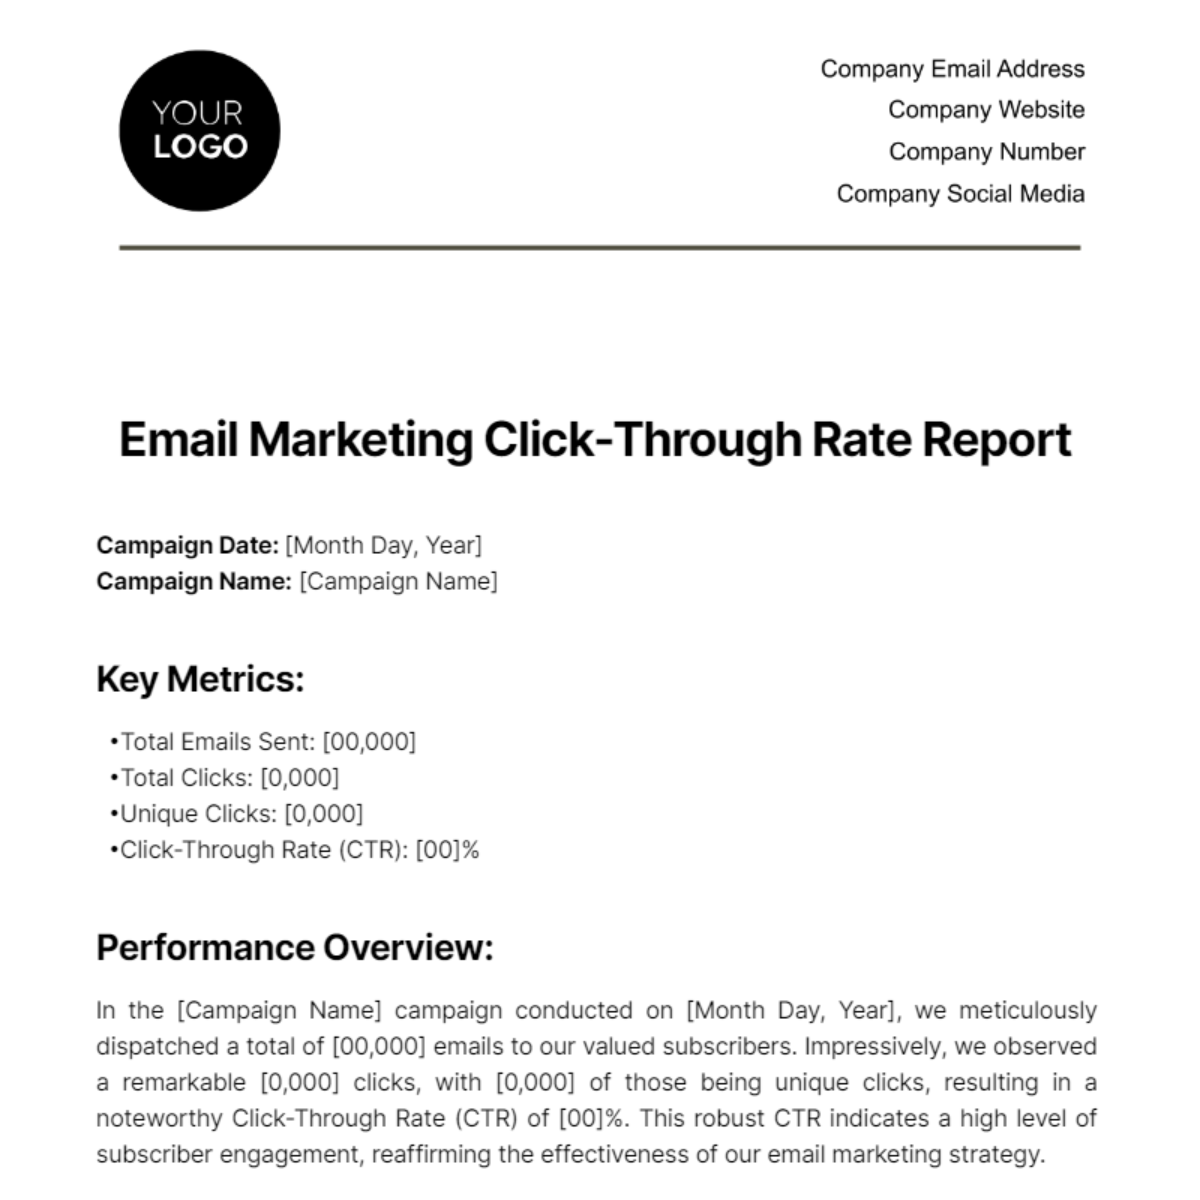 Email Marketing Click-Through Rate Report Template